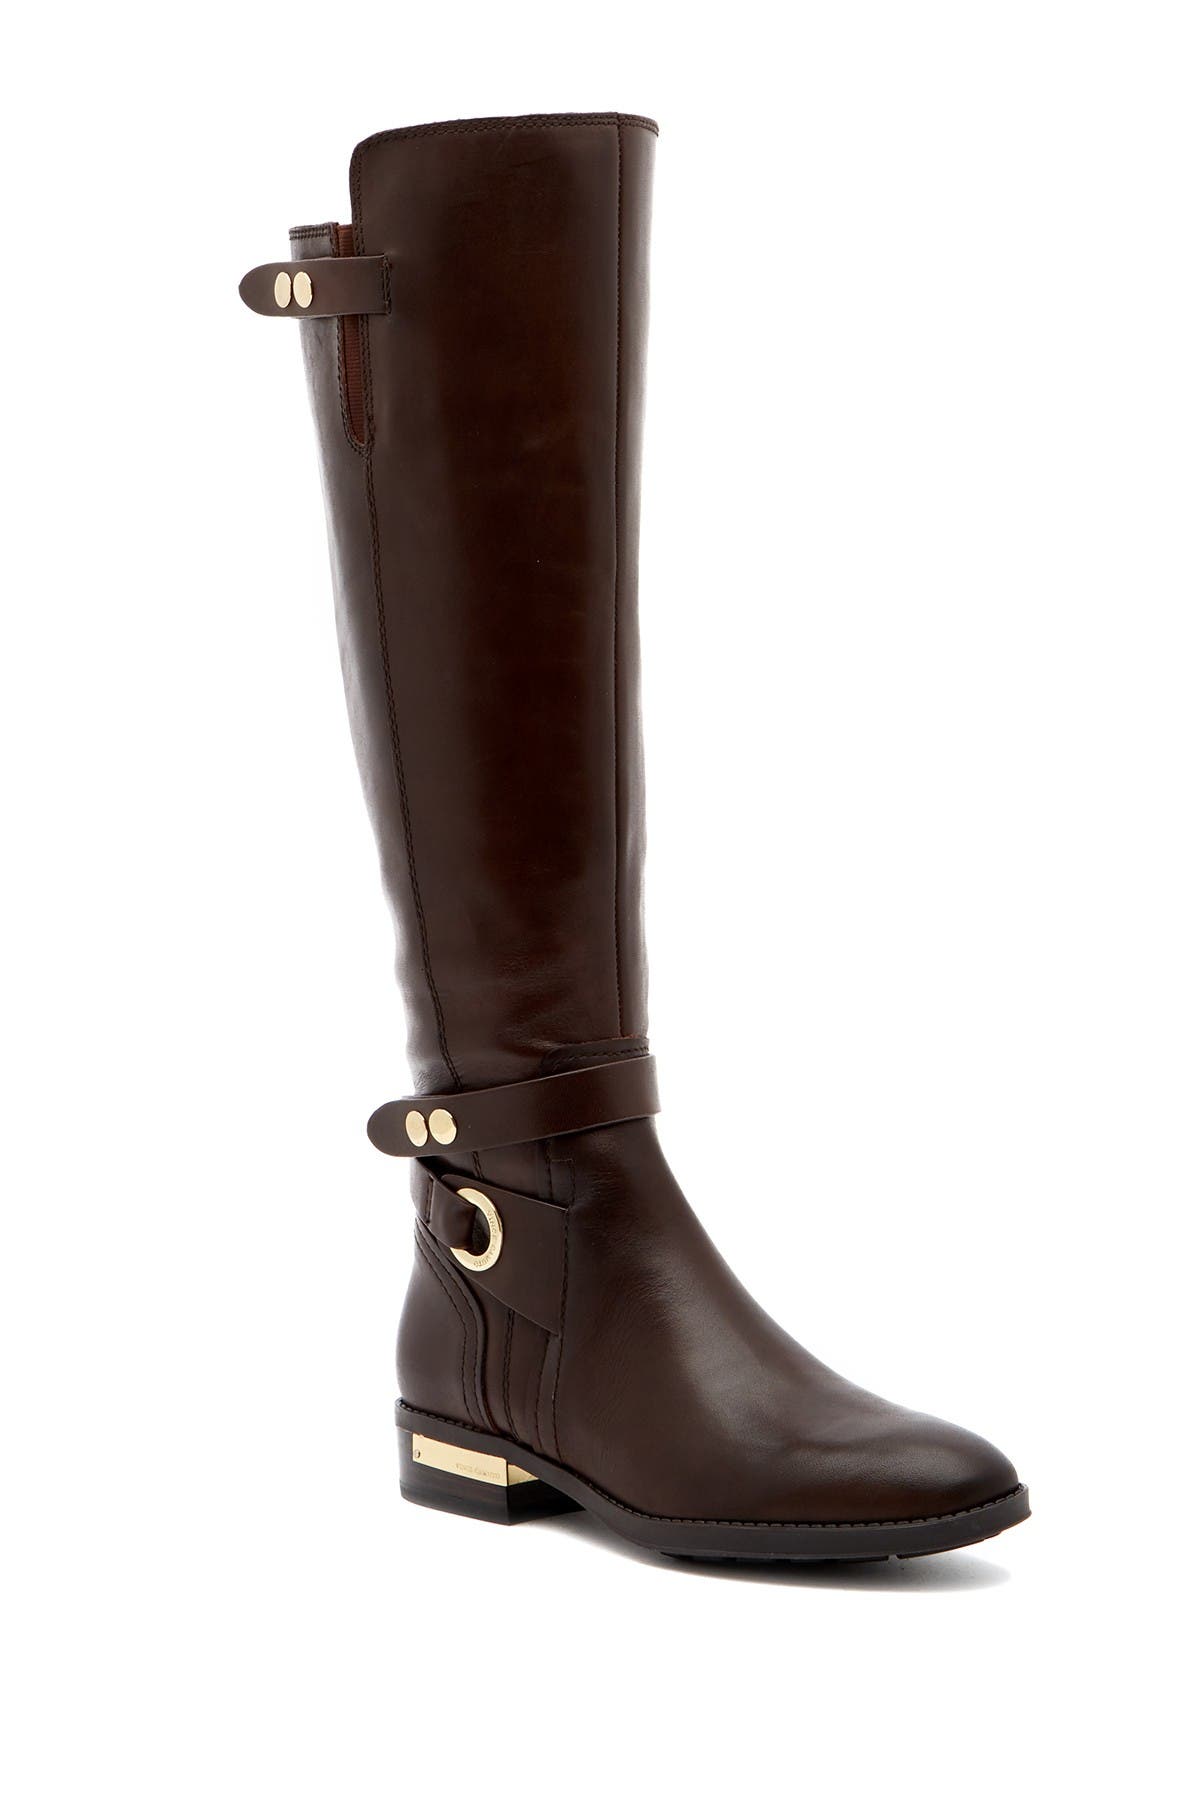 Vince Camuto | Tall Buckled Leather 